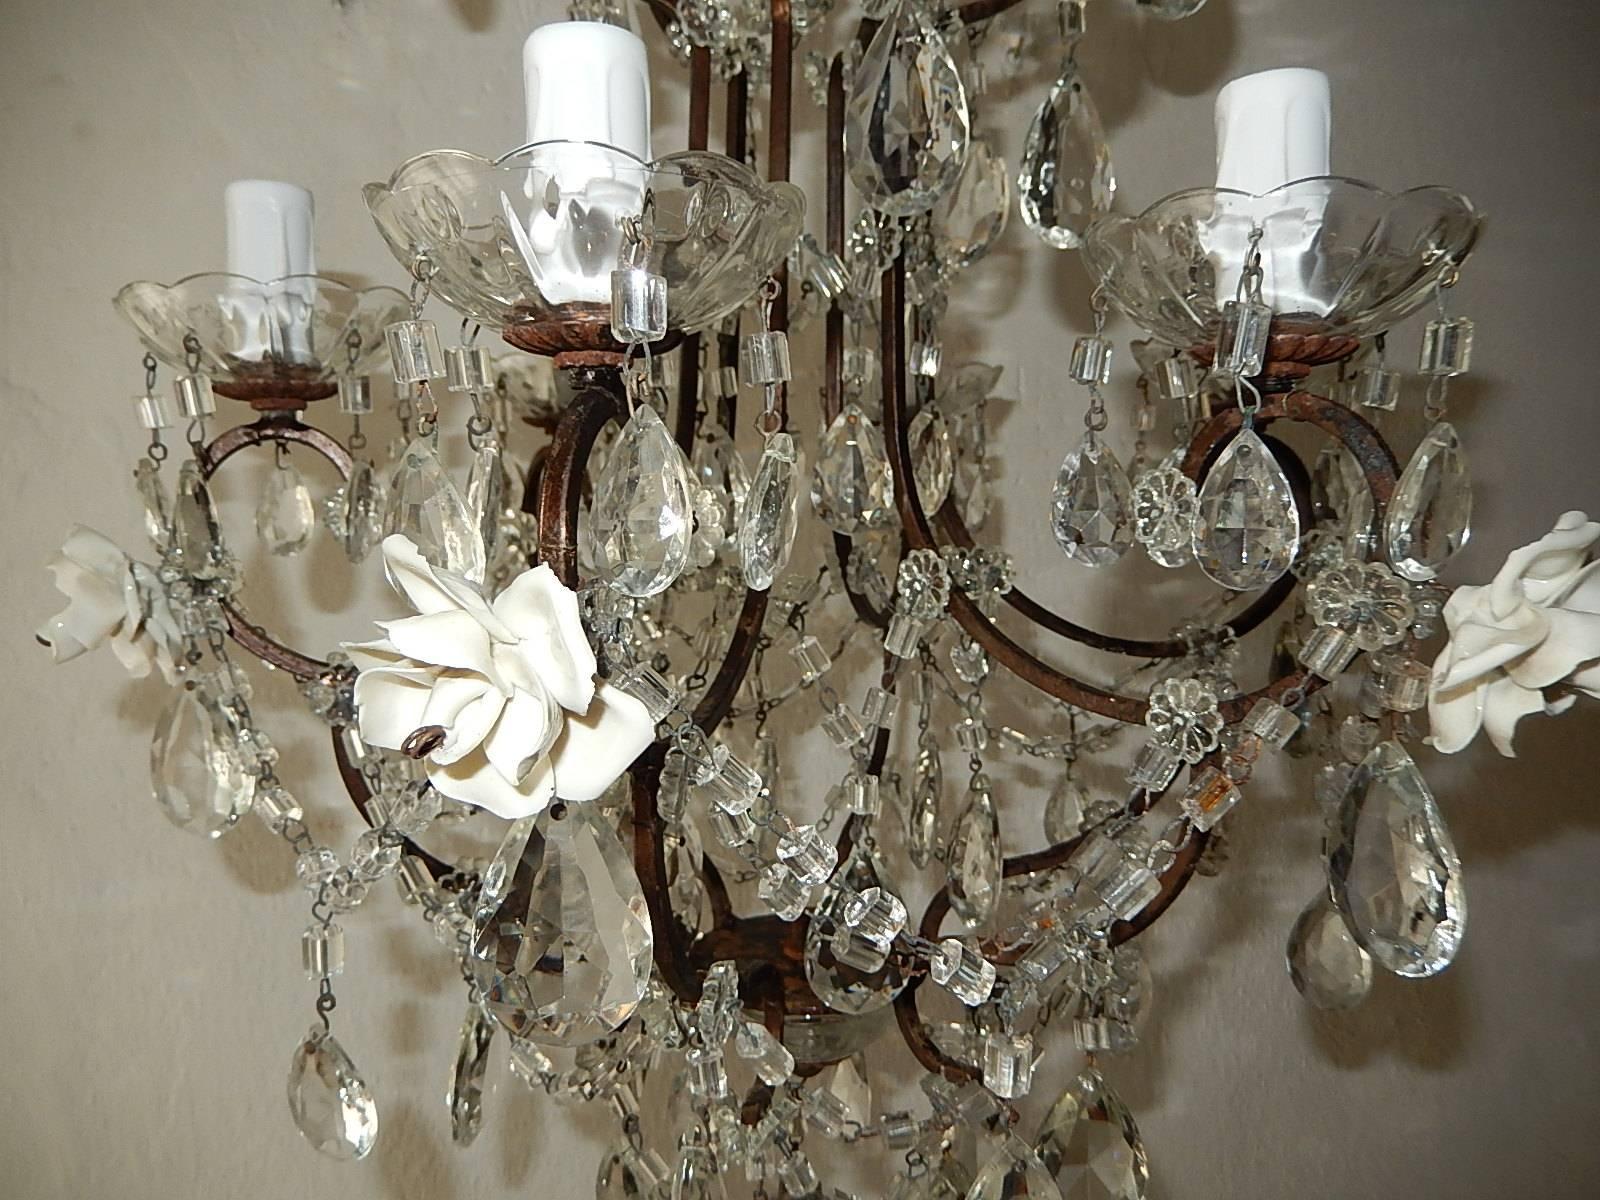 1920 French Elegant Crystal Prisms and Swags with White Roses Chandelier 10